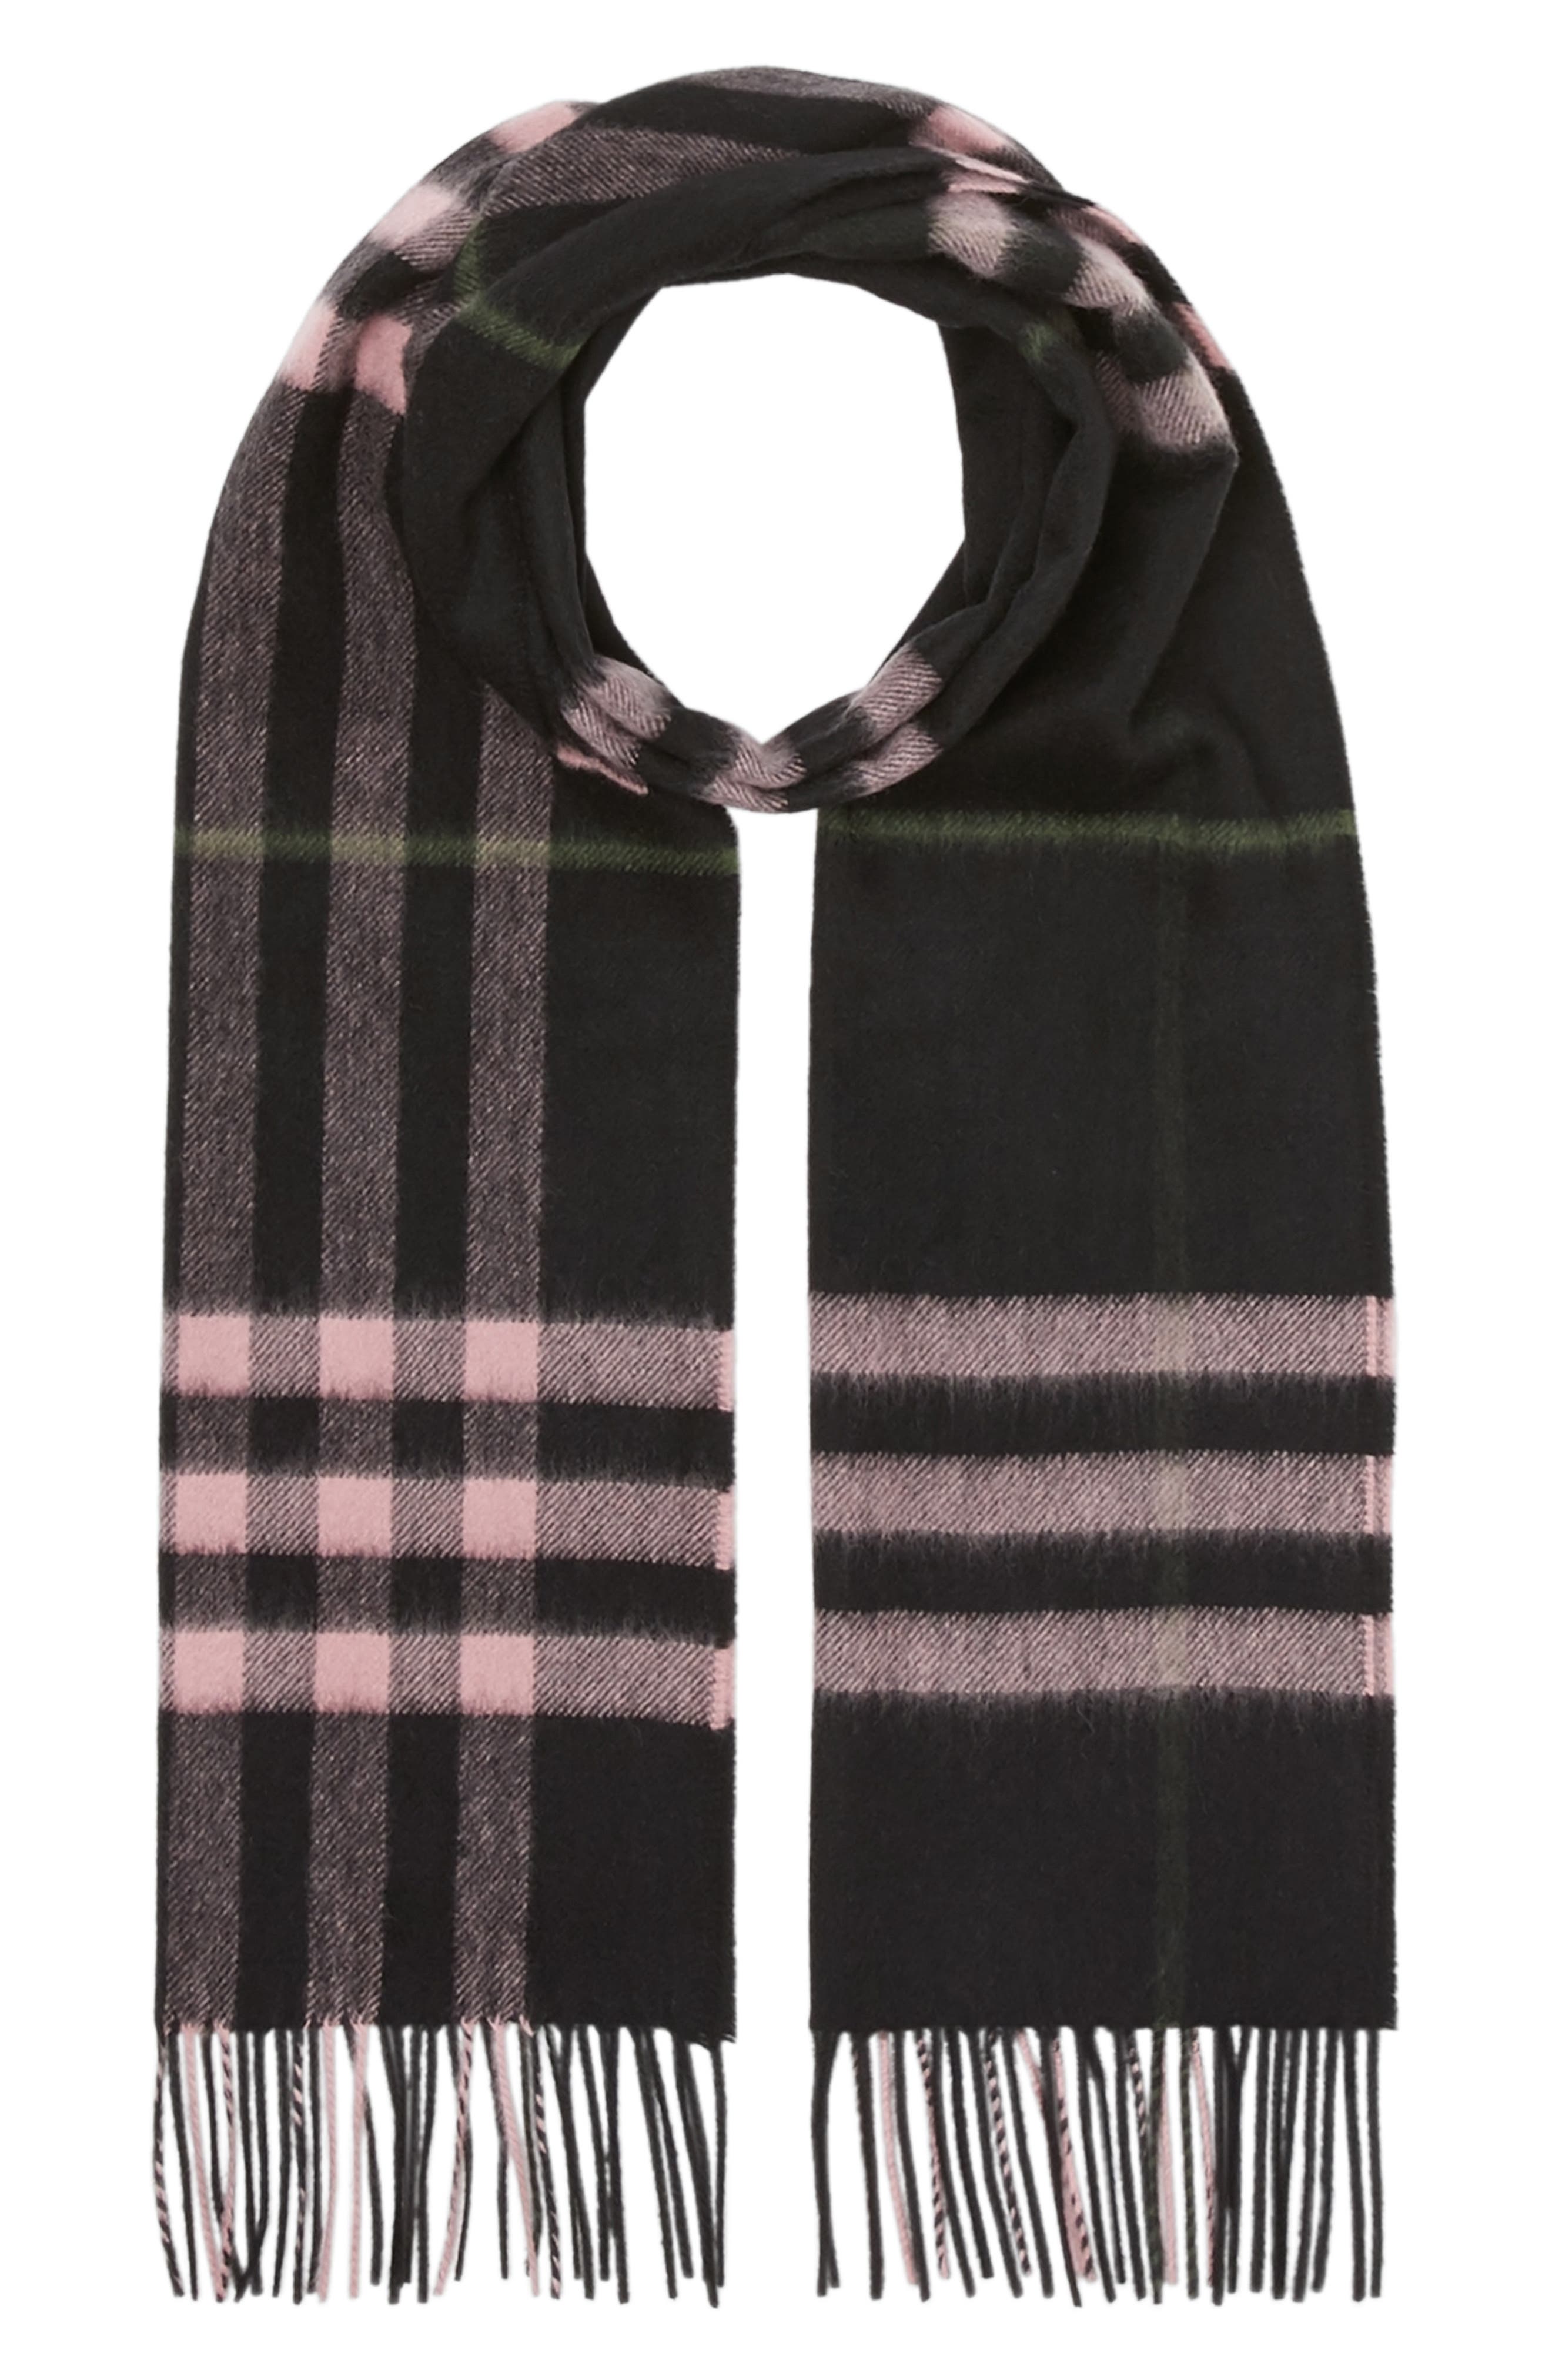 burberry giant icon check cashmere scarf